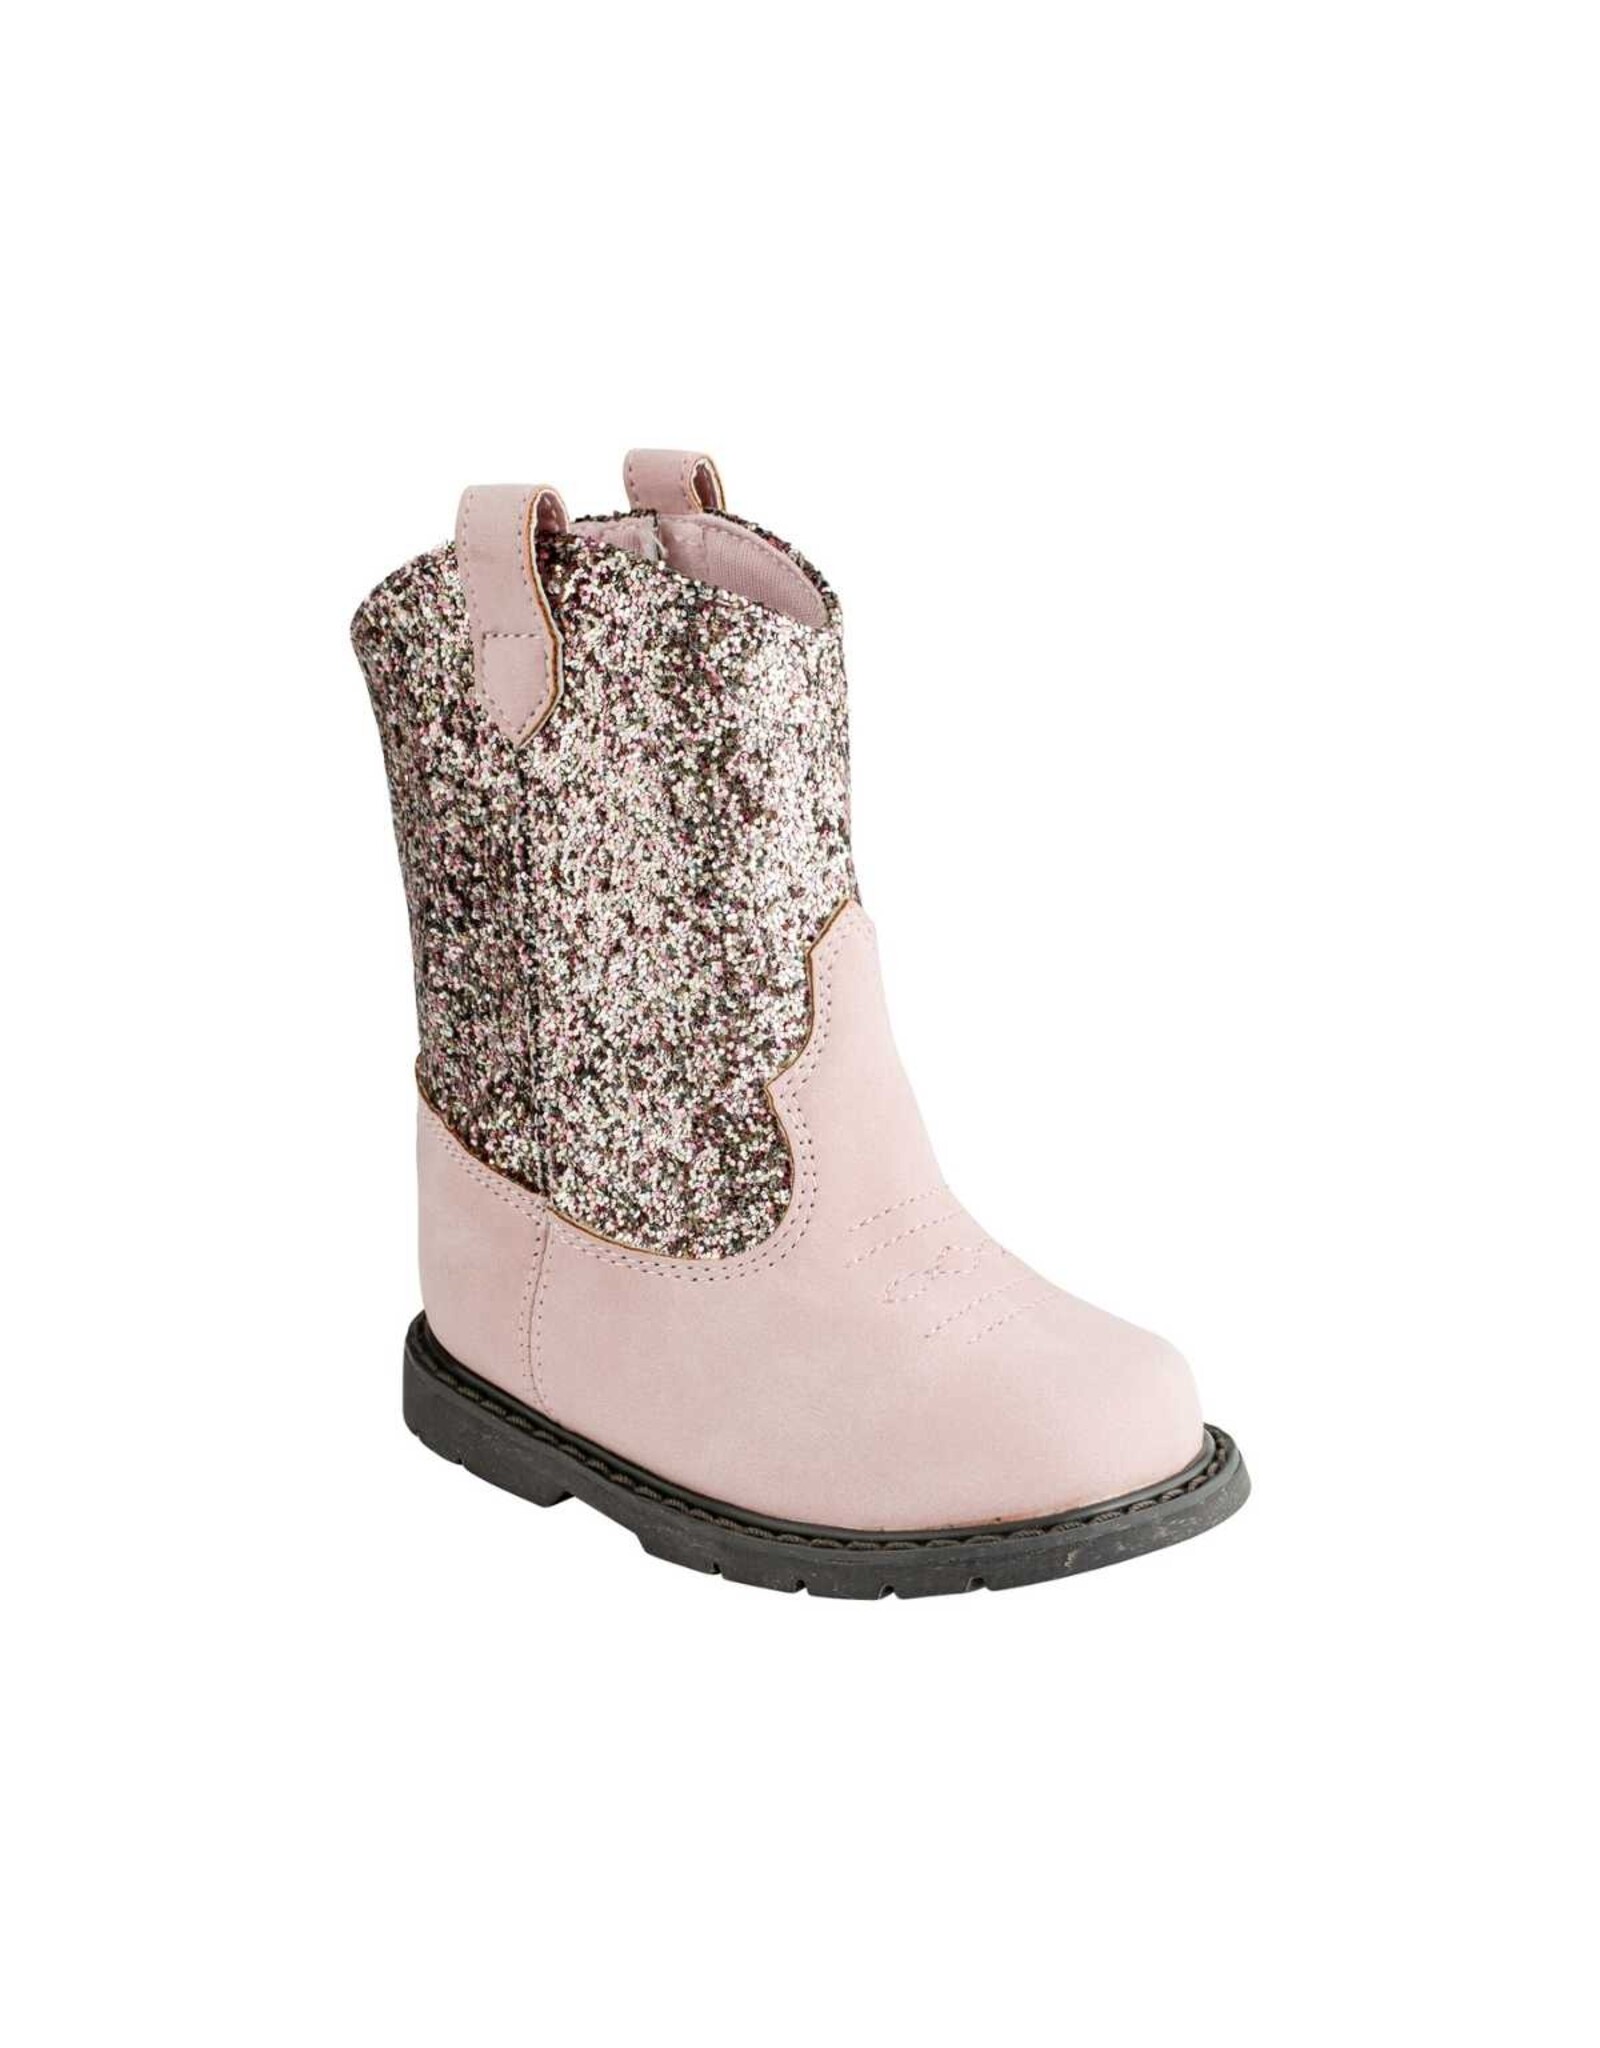 Baby Deer MISSY Toddler Pink and Multi Glitter Western Boot